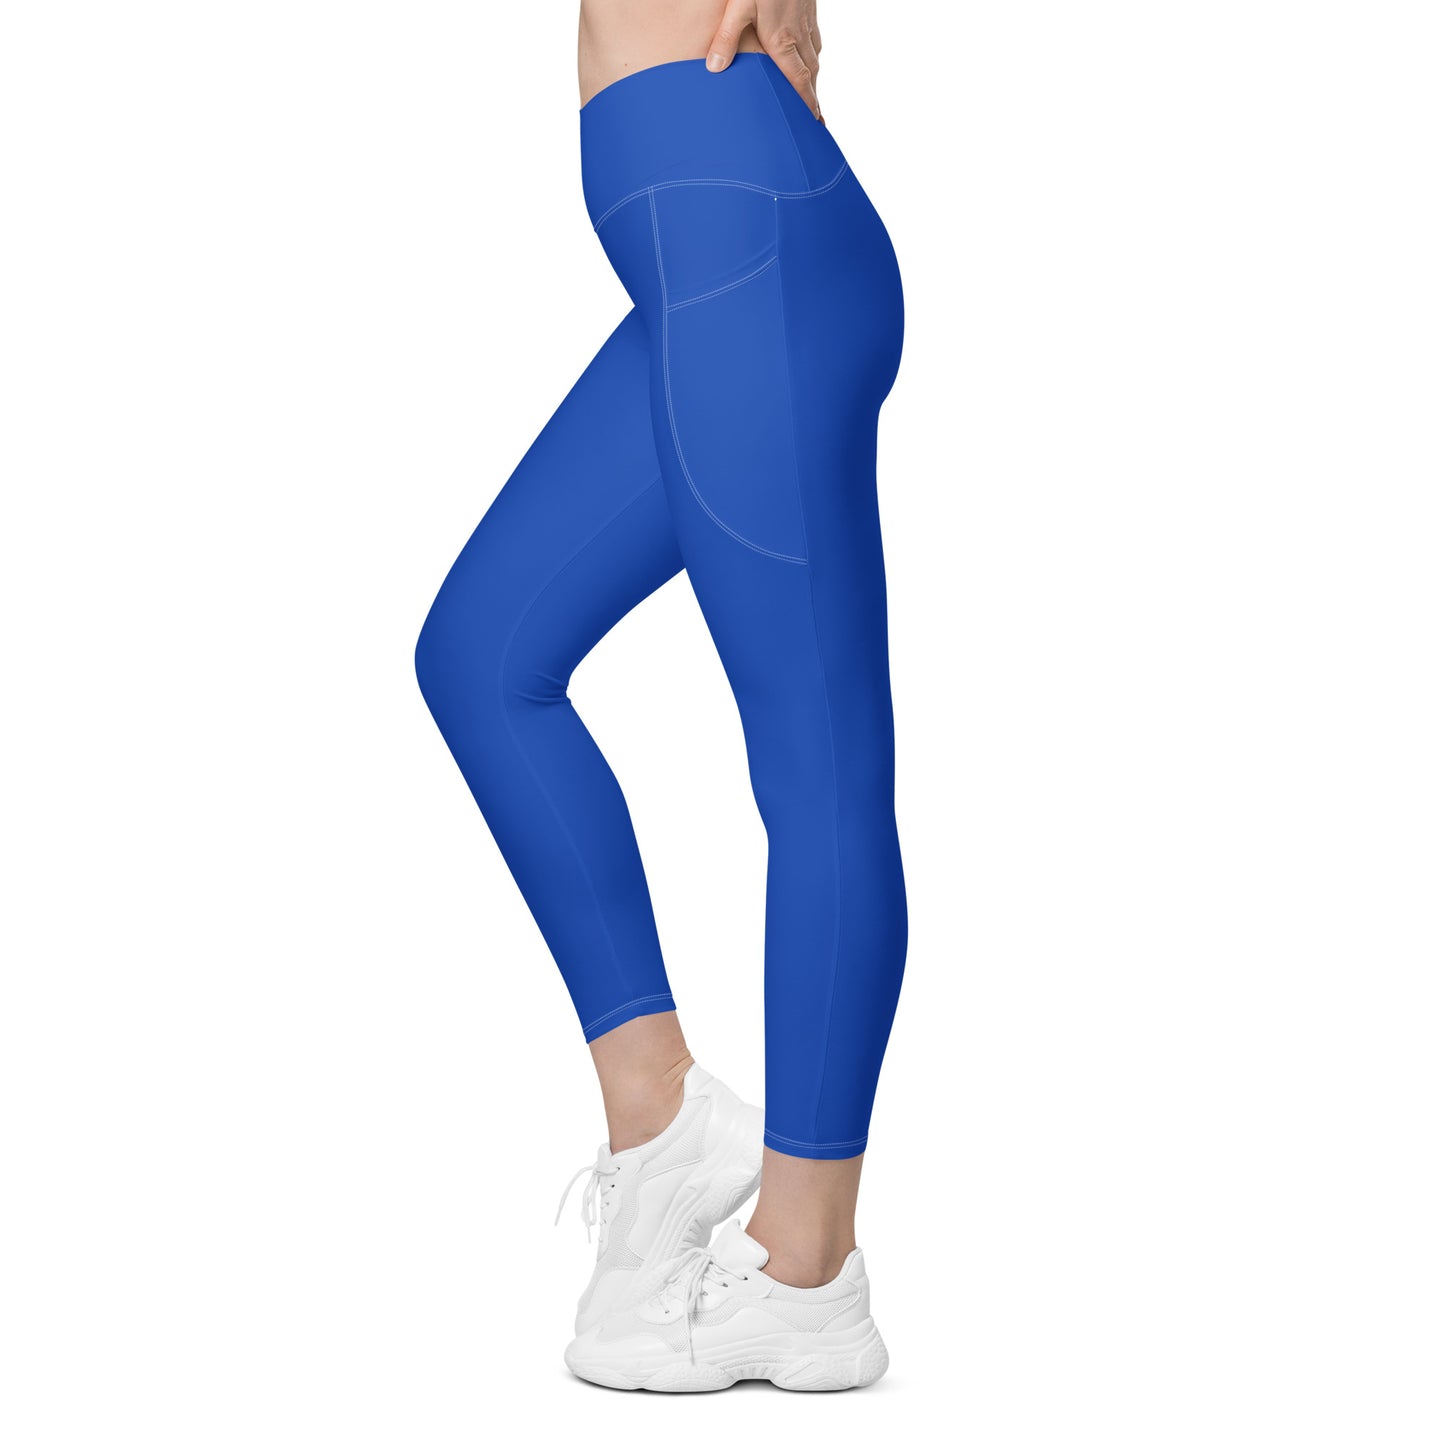 Borno Solid Blue Crossover Waist 7/8 Recycled Yoga Leggings / Yoga Pants with Pockets